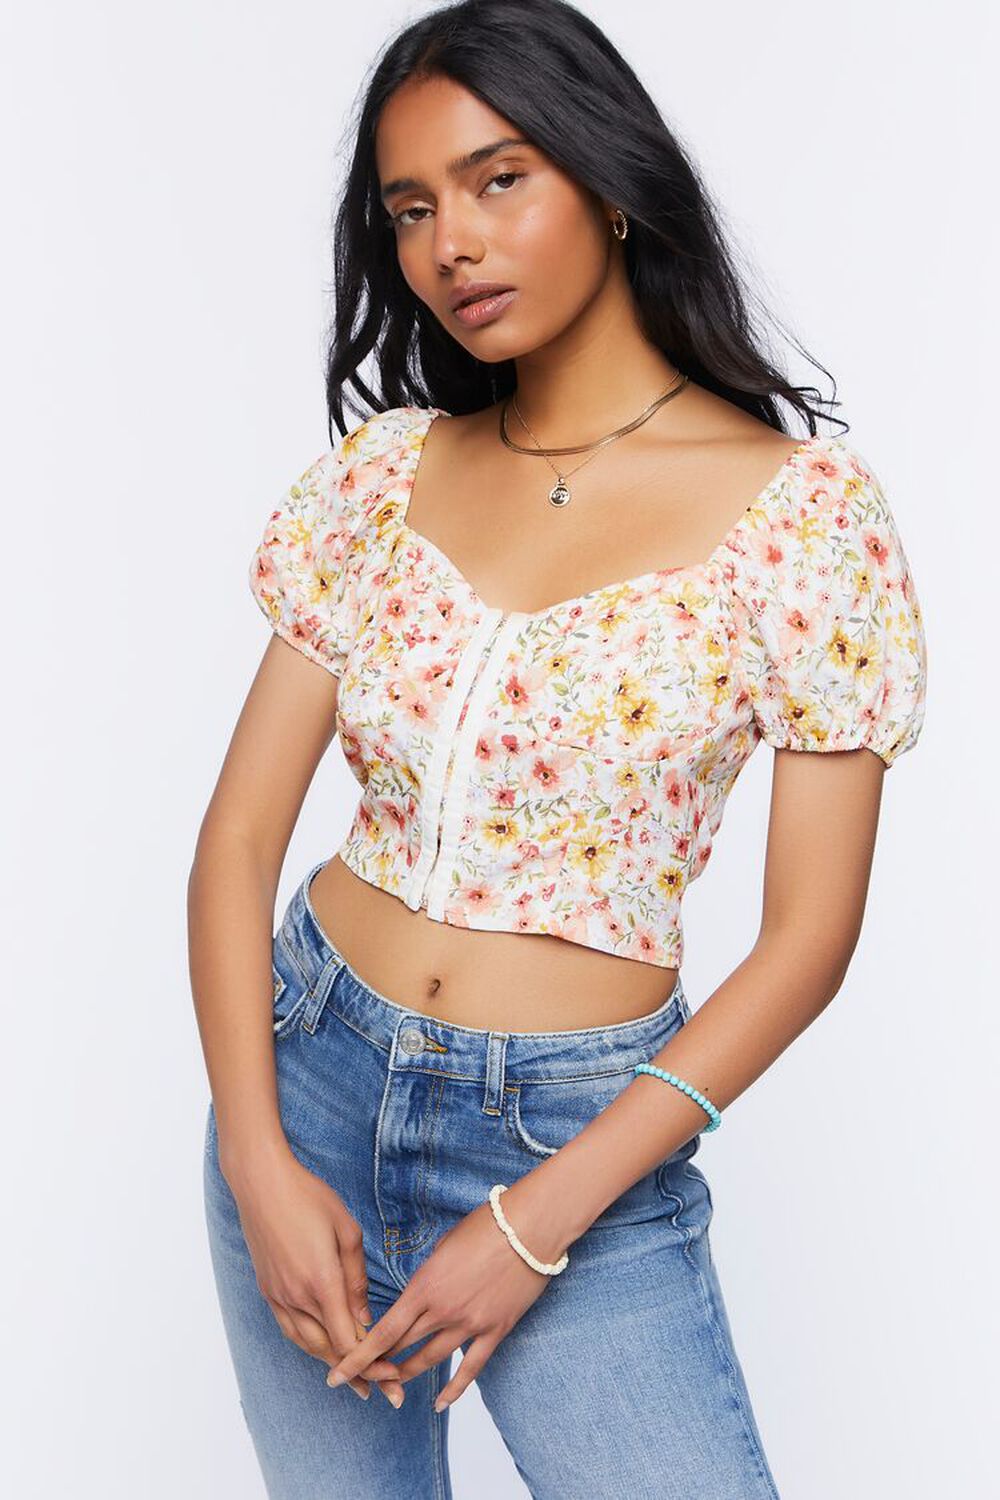 IVORY/MULTI Sweetheart Floral Print Top, image 1